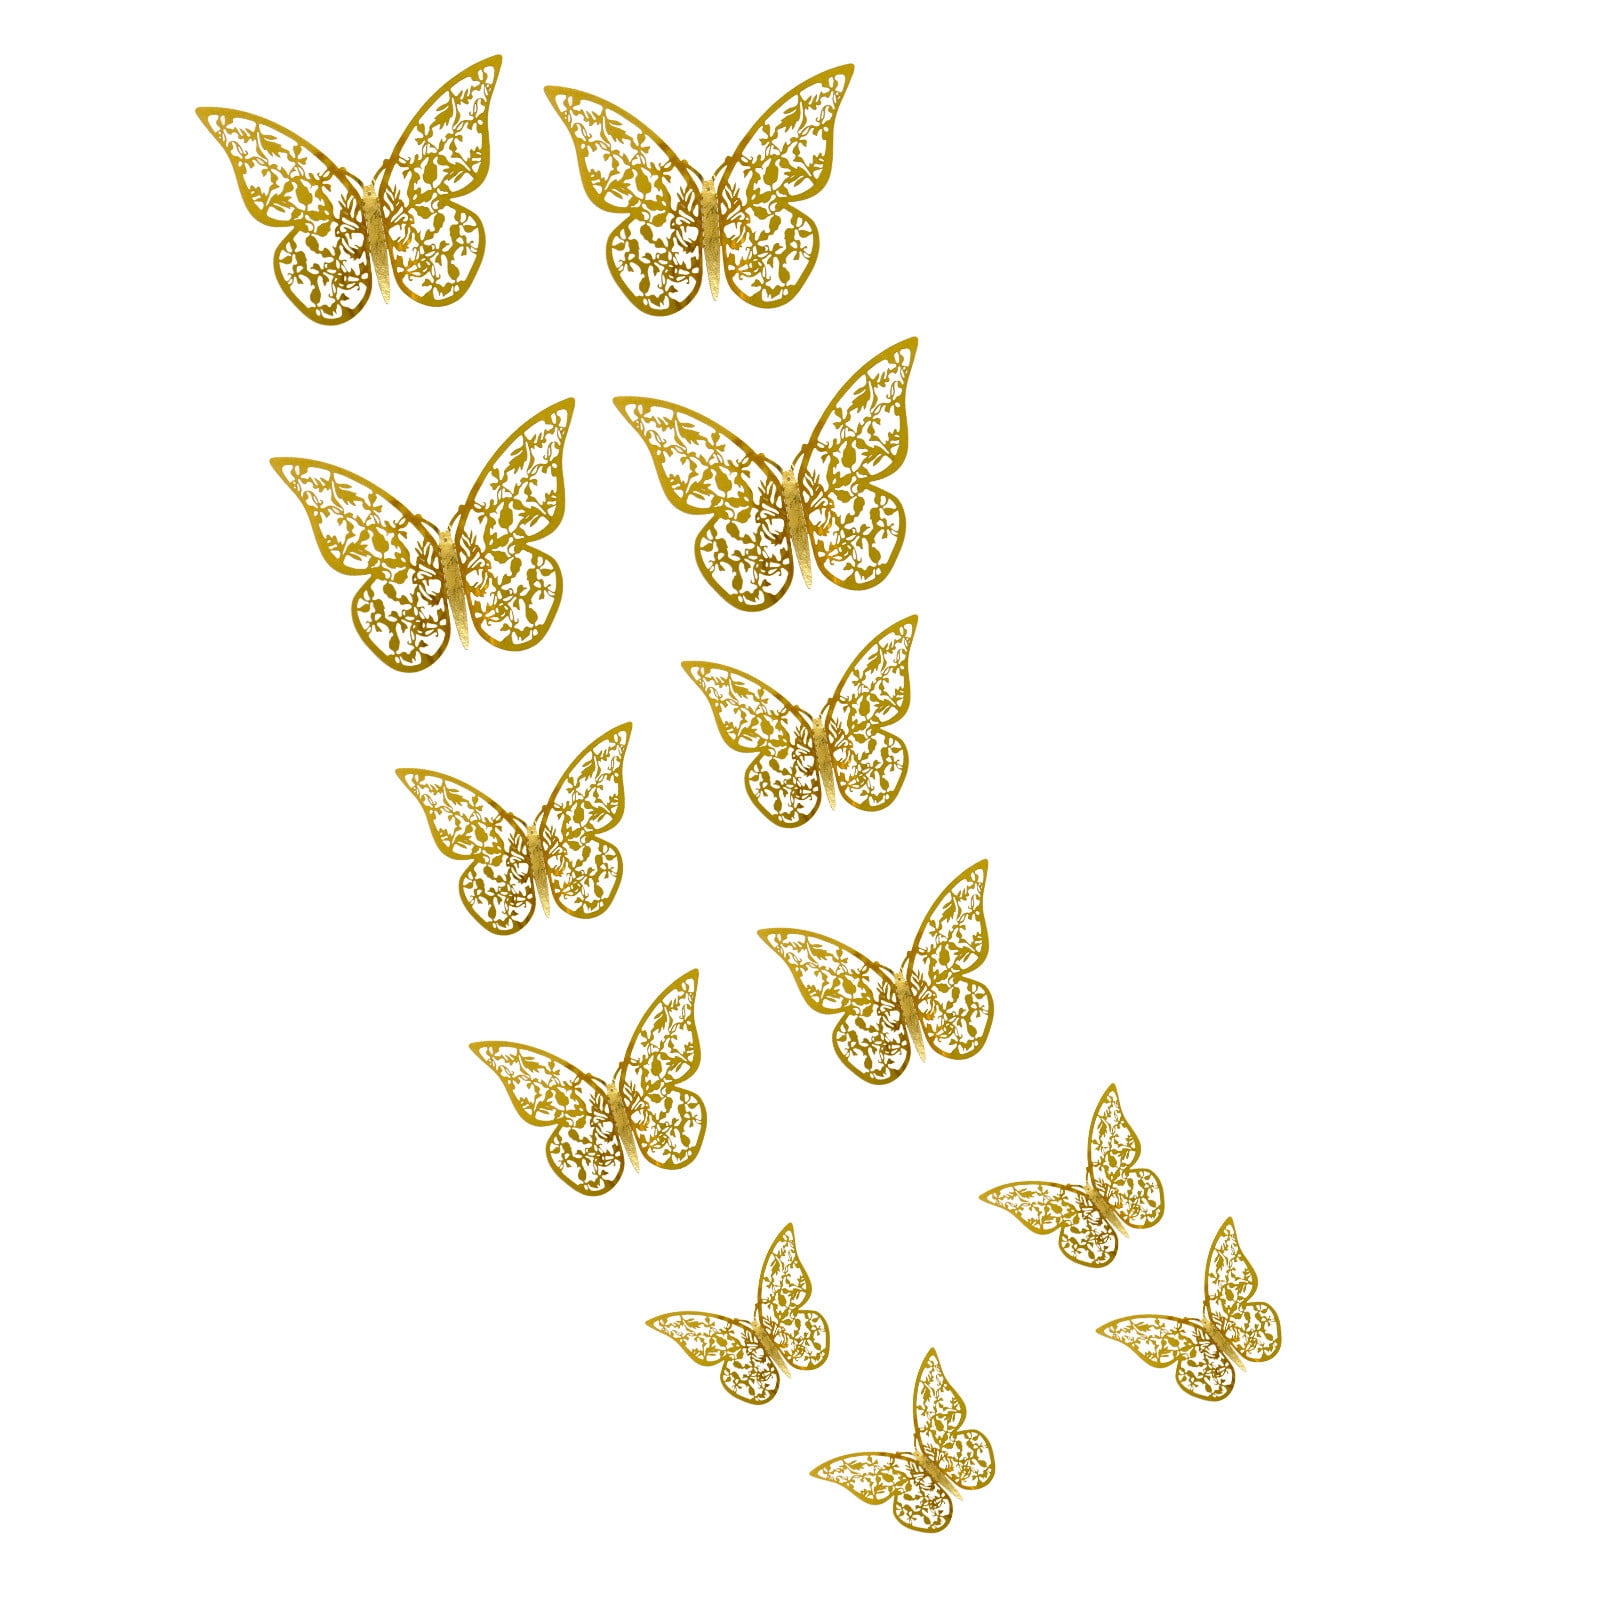 Wrapables 3D Double Wings Butterfly Decorative Wall Decor Stickers, De